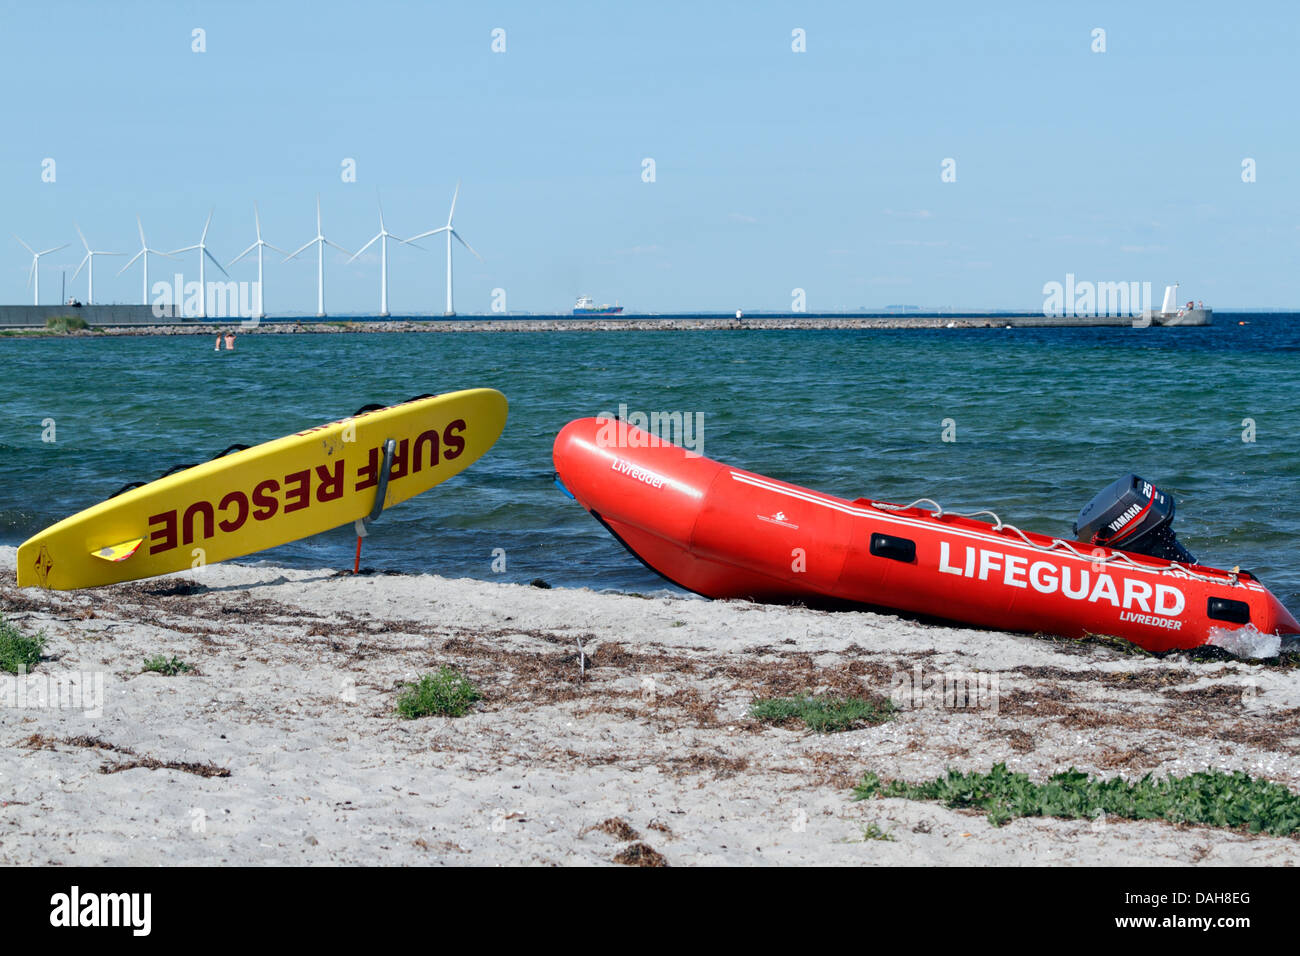 Lifeguard rescue board and inflatable boat on the beach at Kastrup, Copenhagen. Middelgrunden offshore wind park in background. Stock Photo